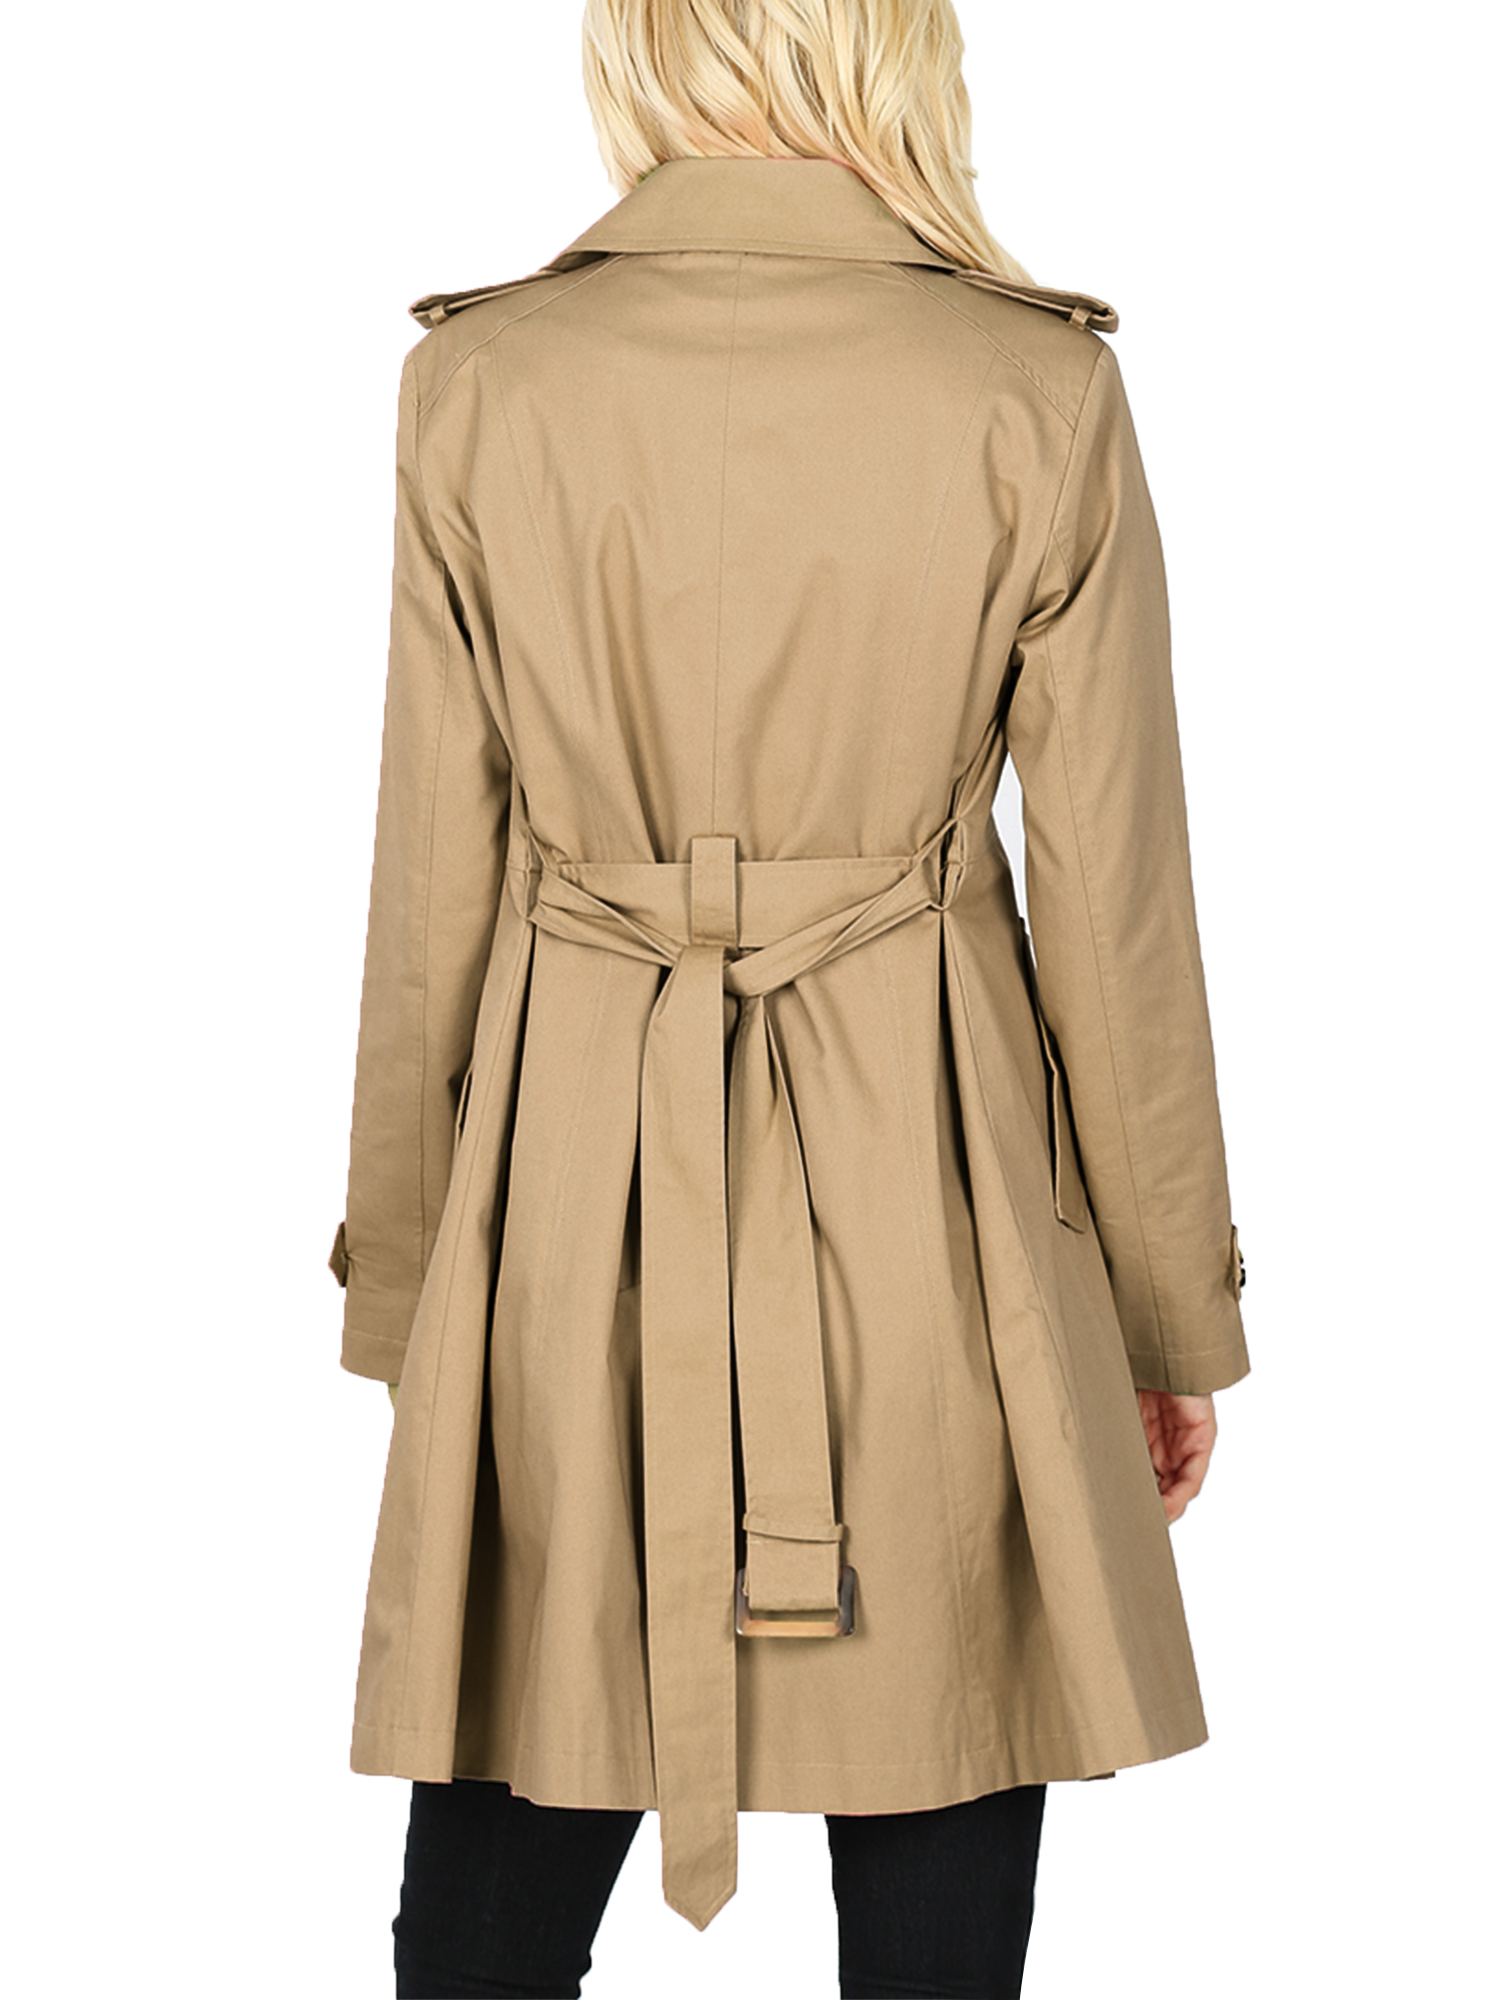 KOGMO Womens Double Breasted Trench Coat Jacket with Waist Belt - image 3 of 5